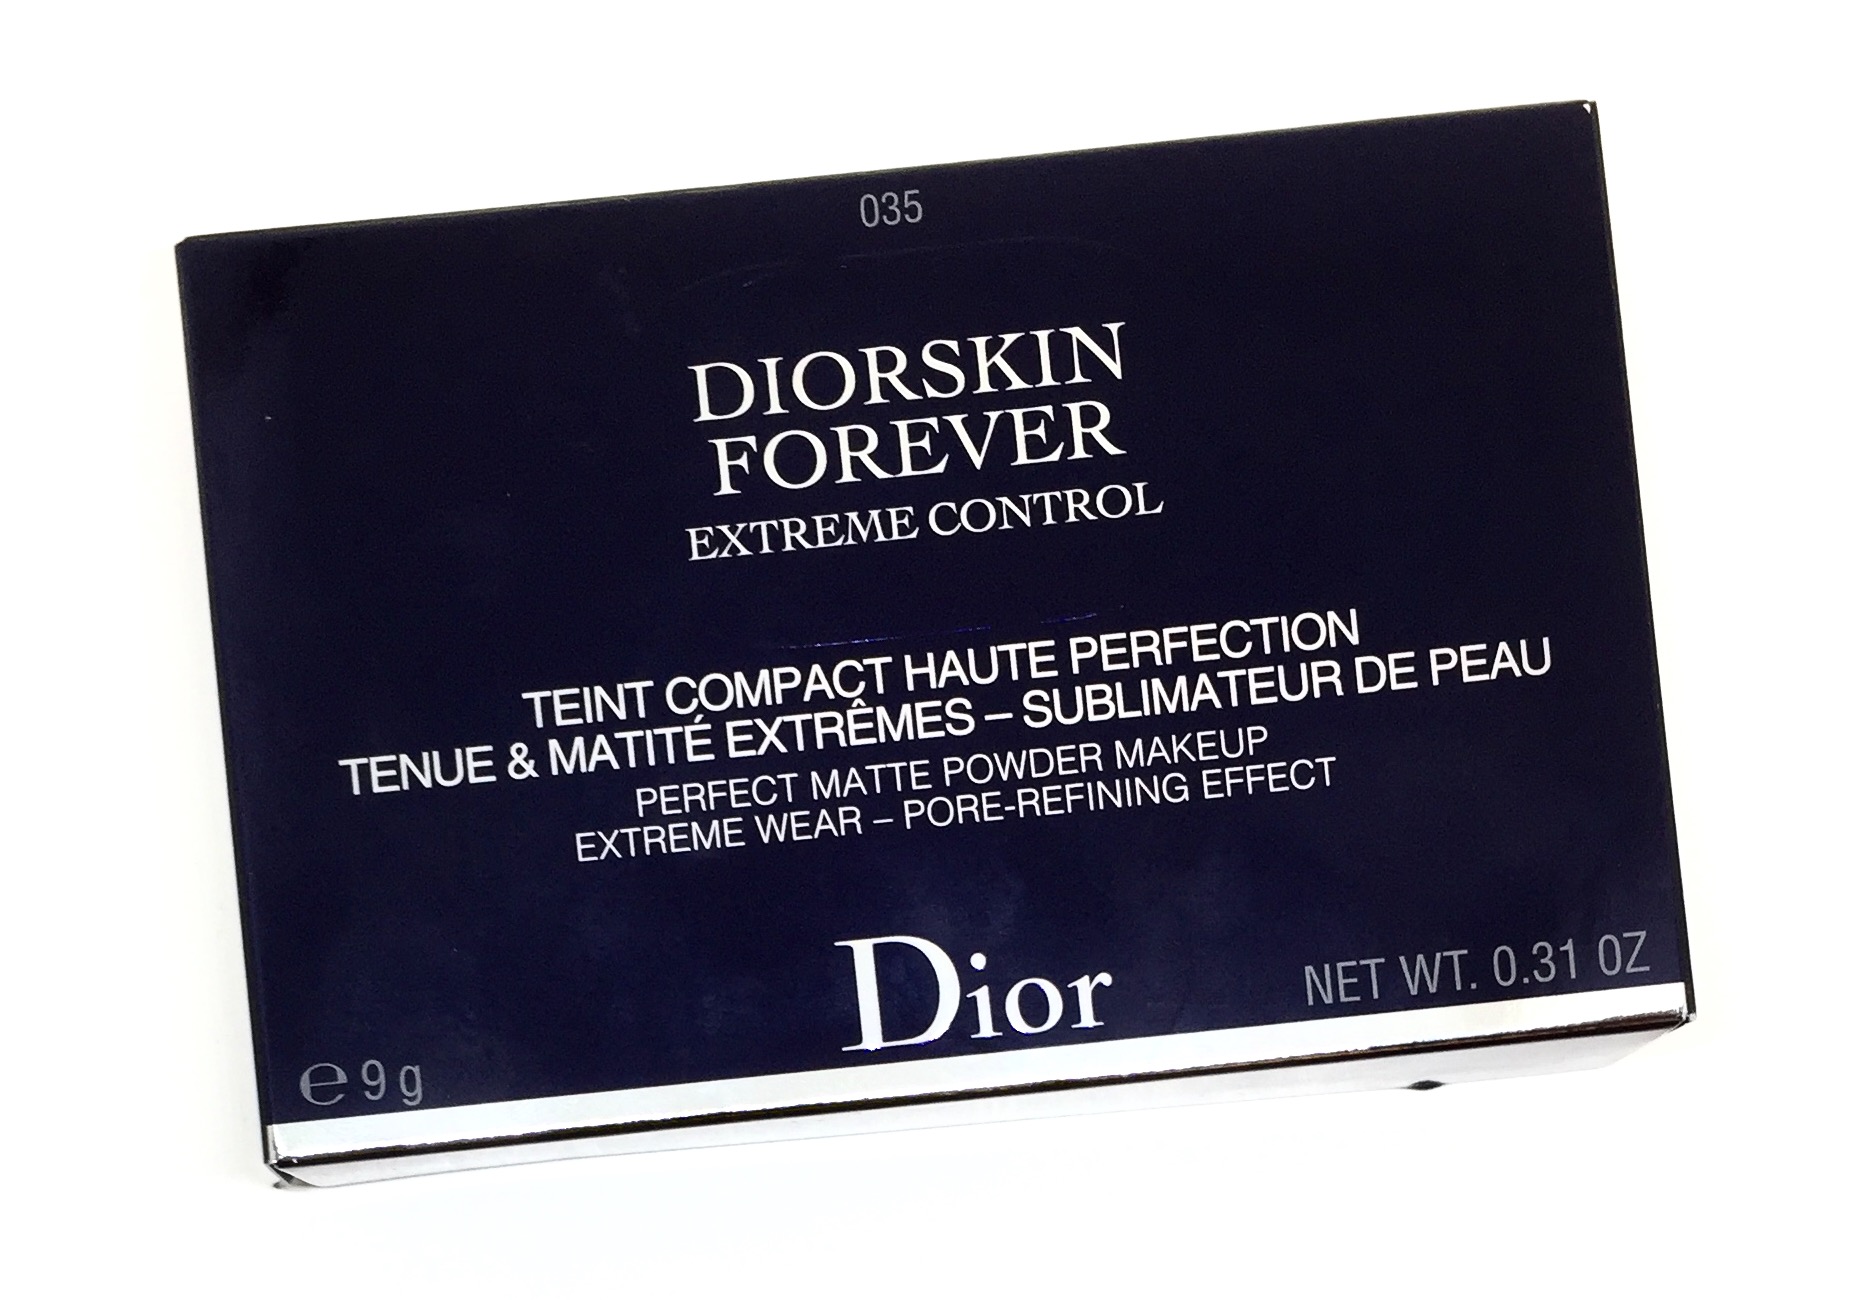 diorskin forever extreme control review